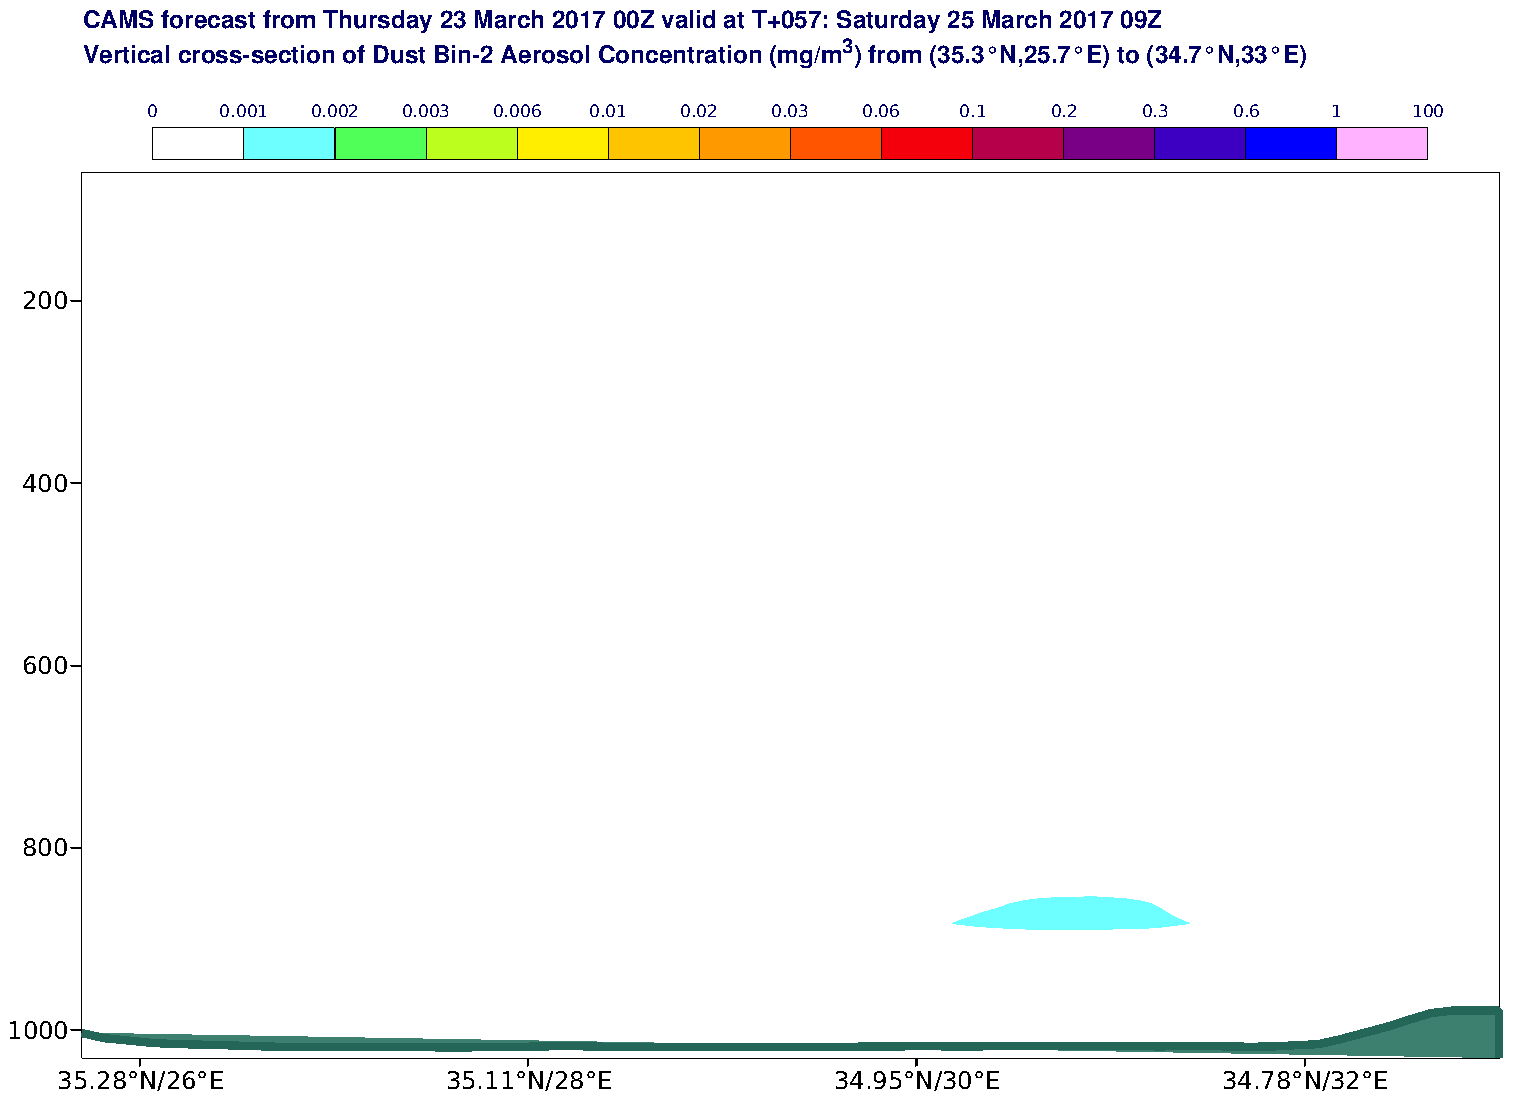 Vertical cross-section of Dust Bin-2 Aerosol Concentration (mg/m3) valid at T57 - 2017-03-25 09:00